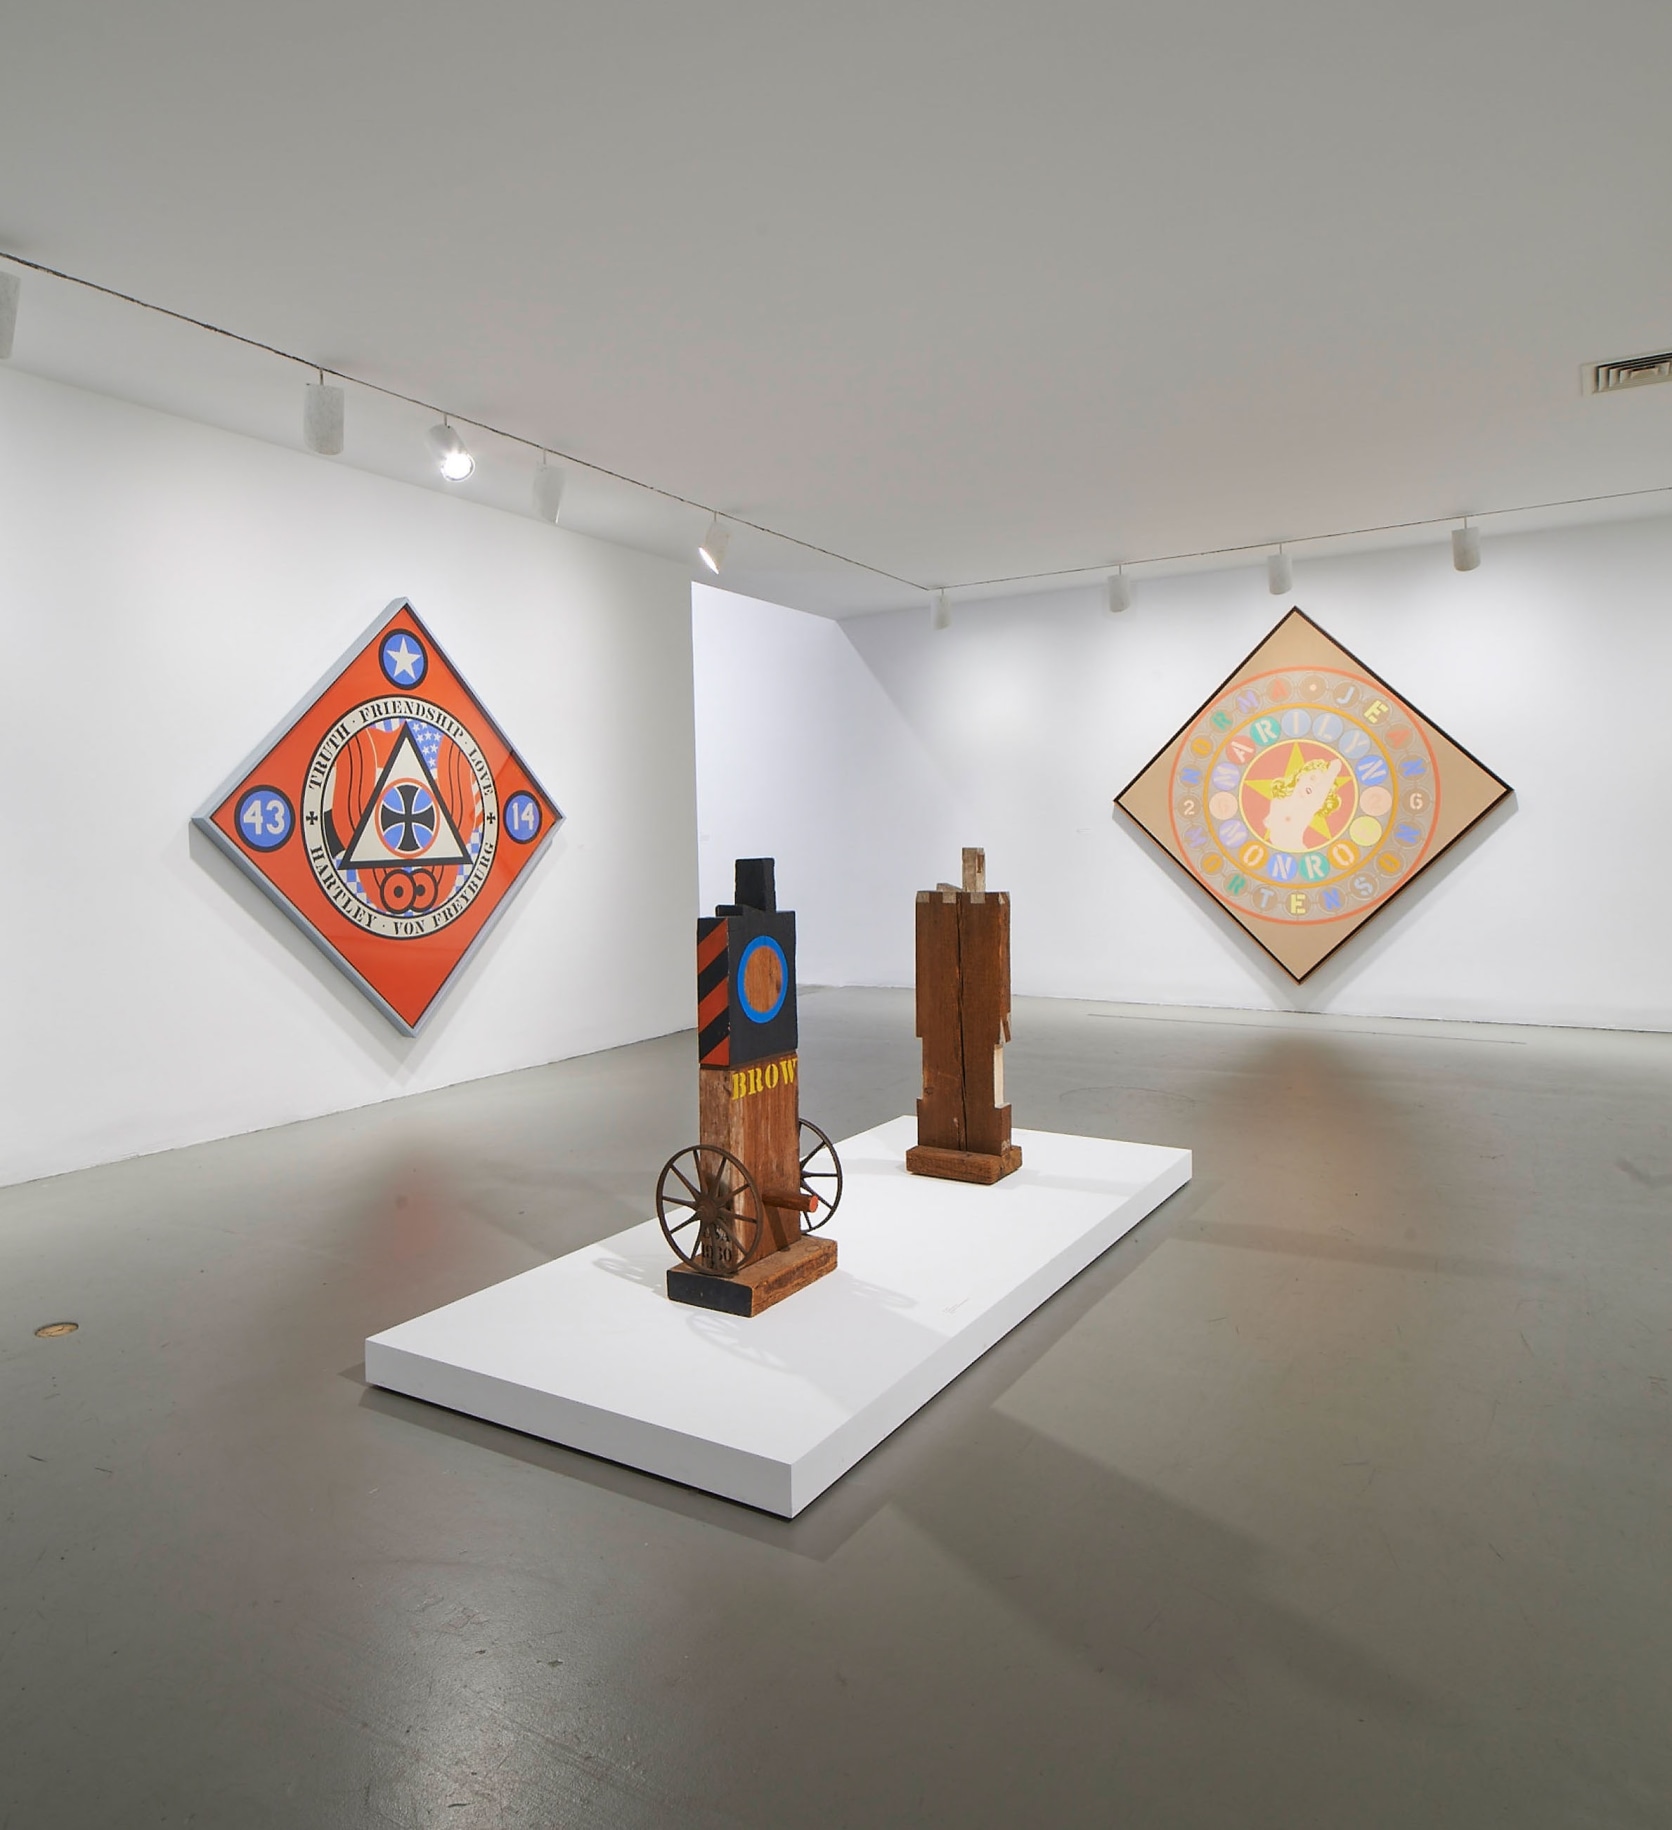 Installation view of Robert Indiana: Beyond LOVE, Whitney Museum of American Art, New York, September 26, 2013&ndash;January 5, 2014. Left to right,&nbsp;KvF X (Hartley Elegy) (1989&ndash;94), Brow (1960&ndash;62), M (1960), and The Metamporhosis of Norma Jean Mortenson (1967), &nbsp;